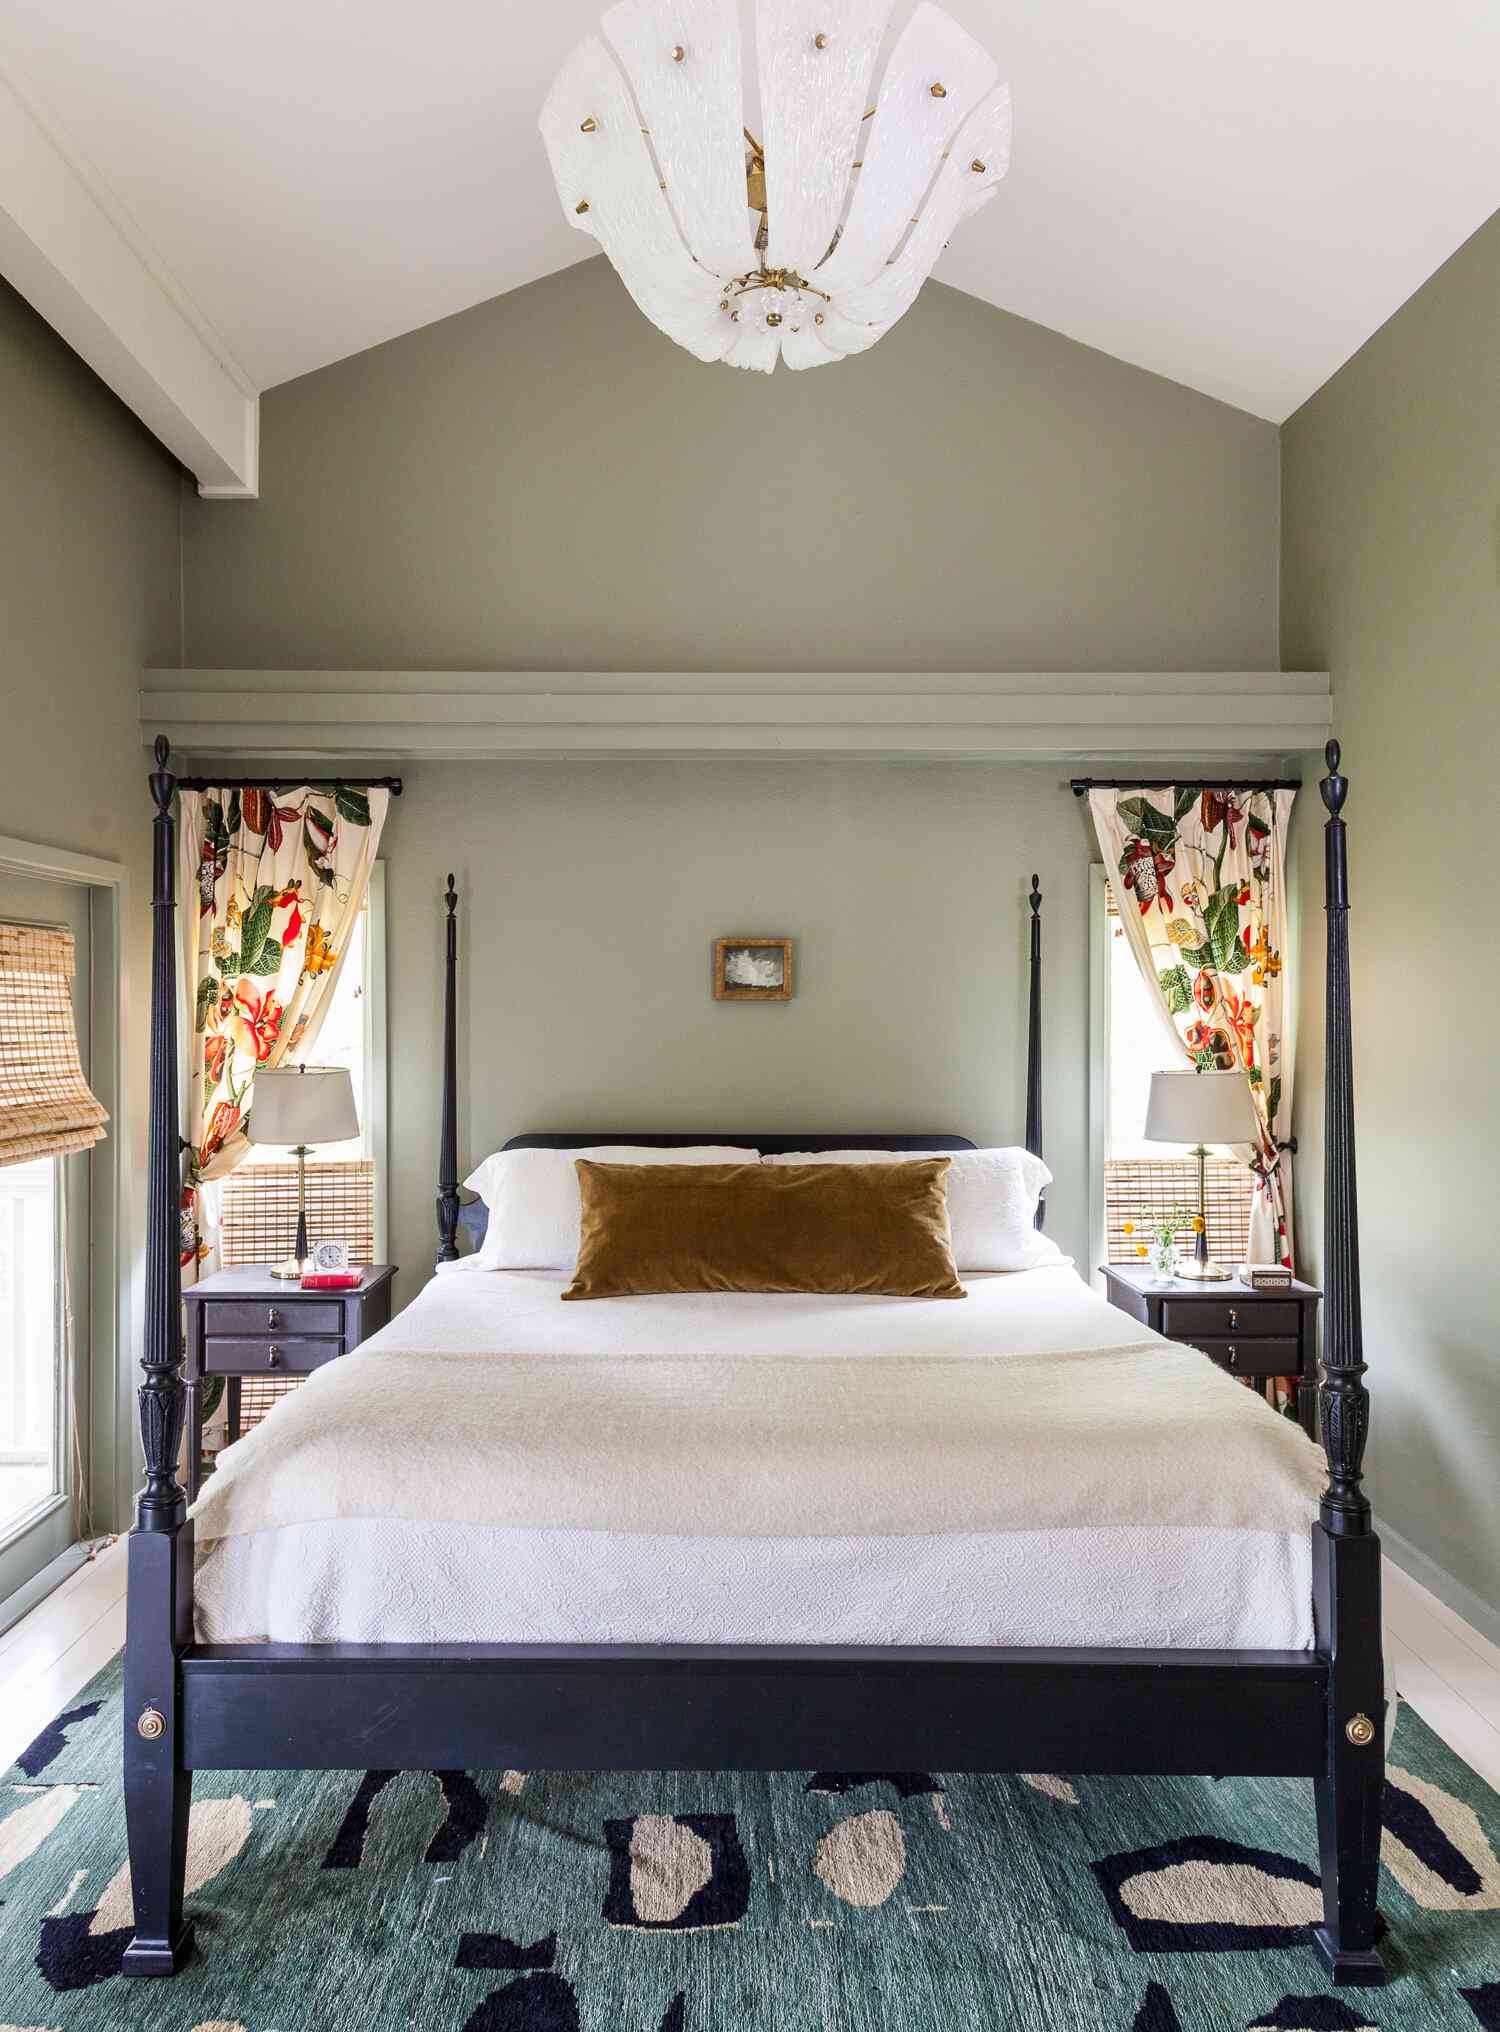 floral narrow curtains on either side of bed